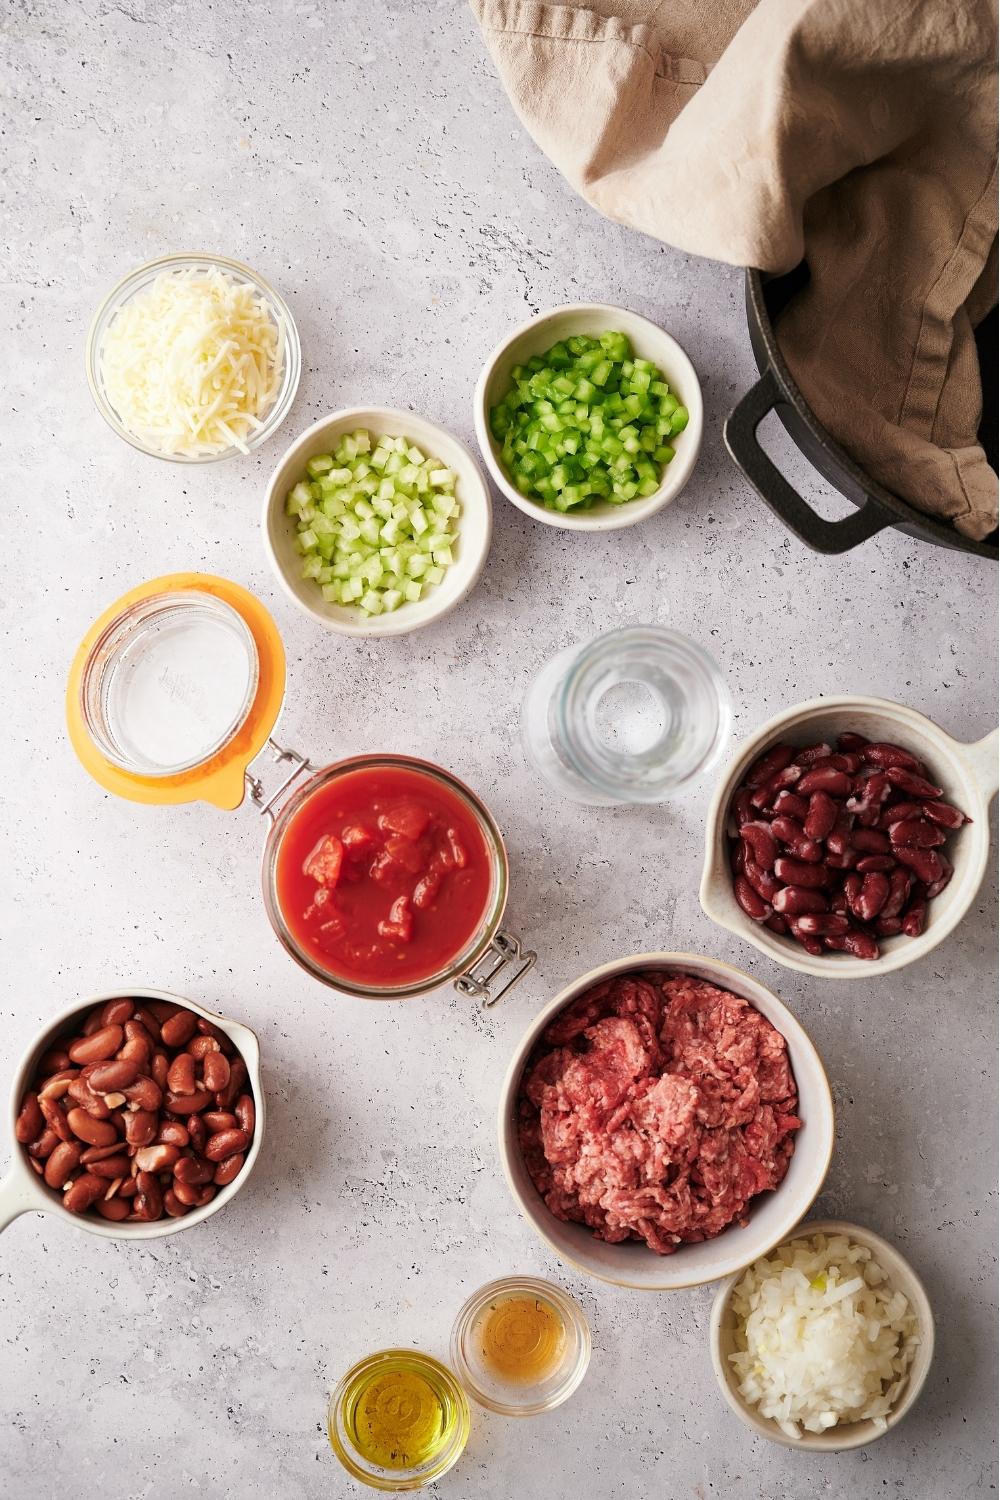 An assortment of ingredients for chili including bowls of stewed tomato, beans, raw ground beef, celery, onion, bell pepper, and more. There is a partial view of a large pot with a white kitchen towel in the pot.